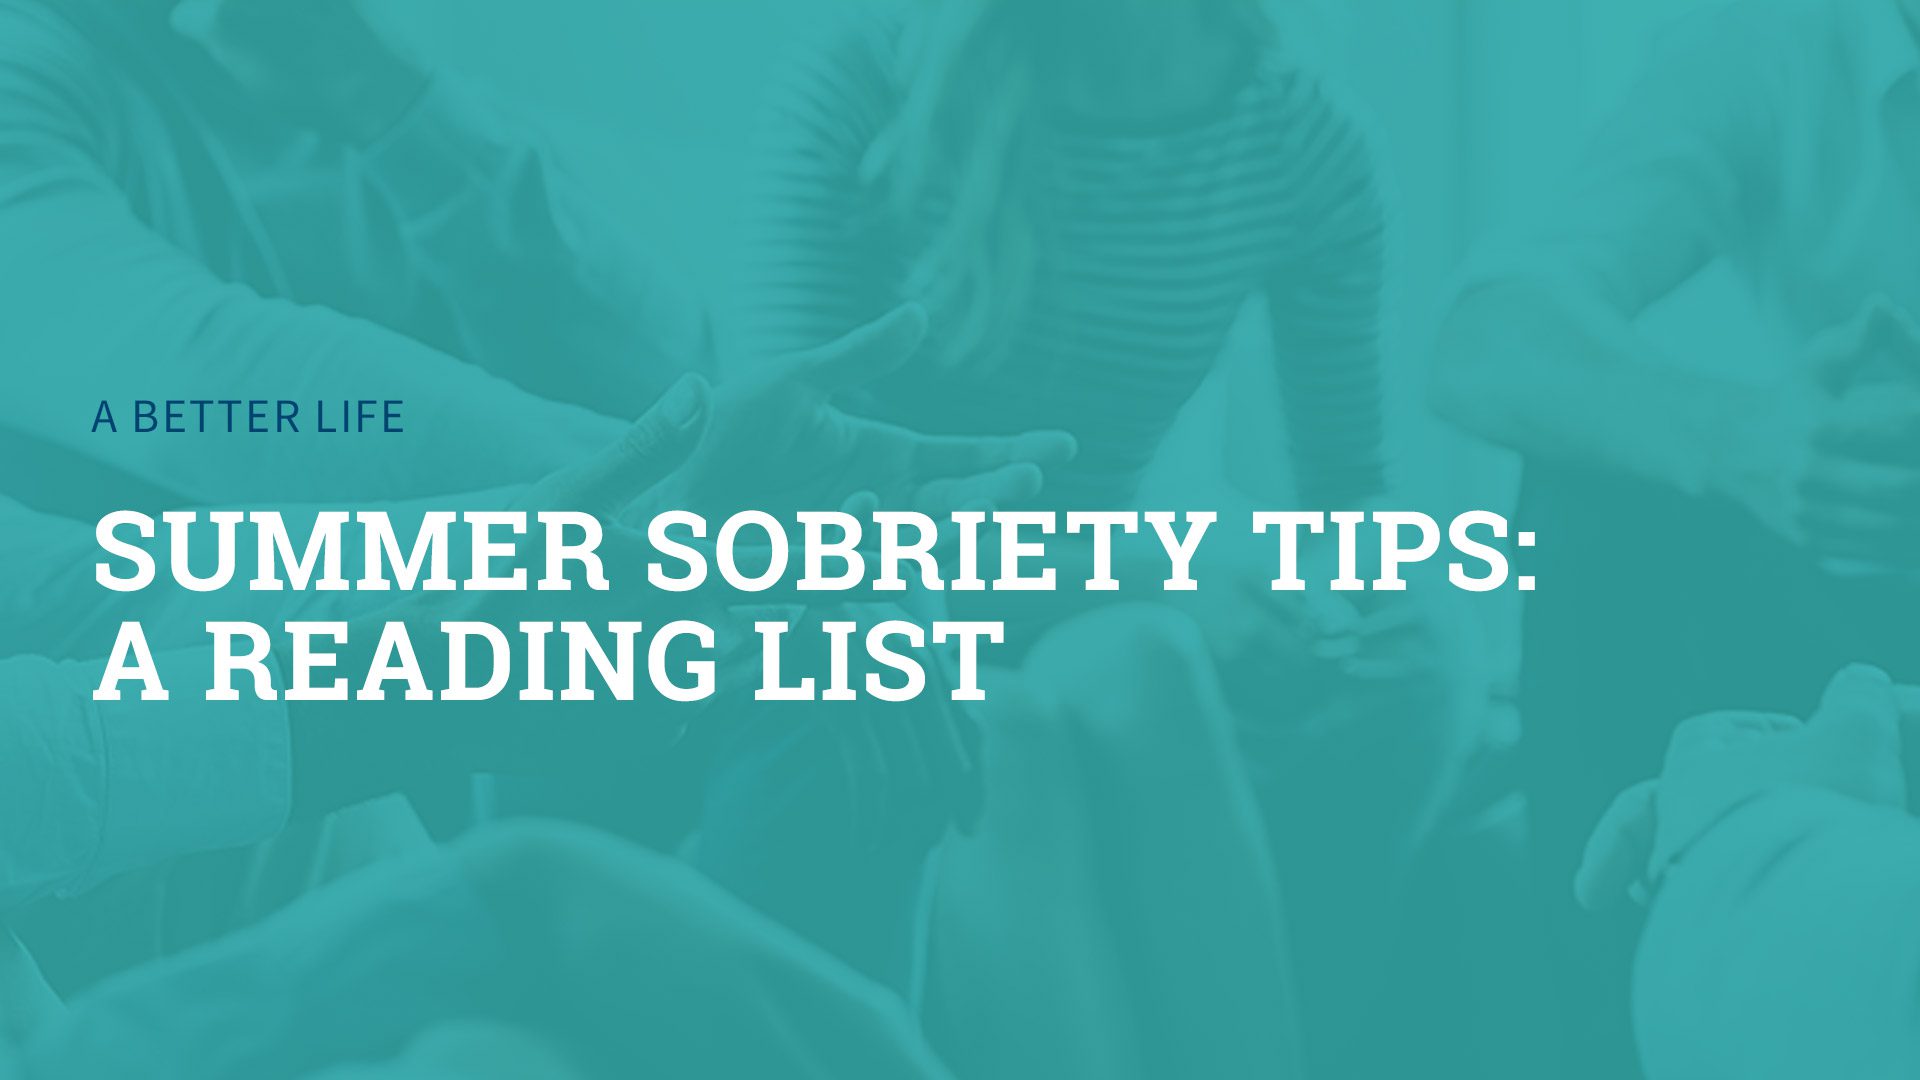 Summer Sobriety Tips: A Reading List